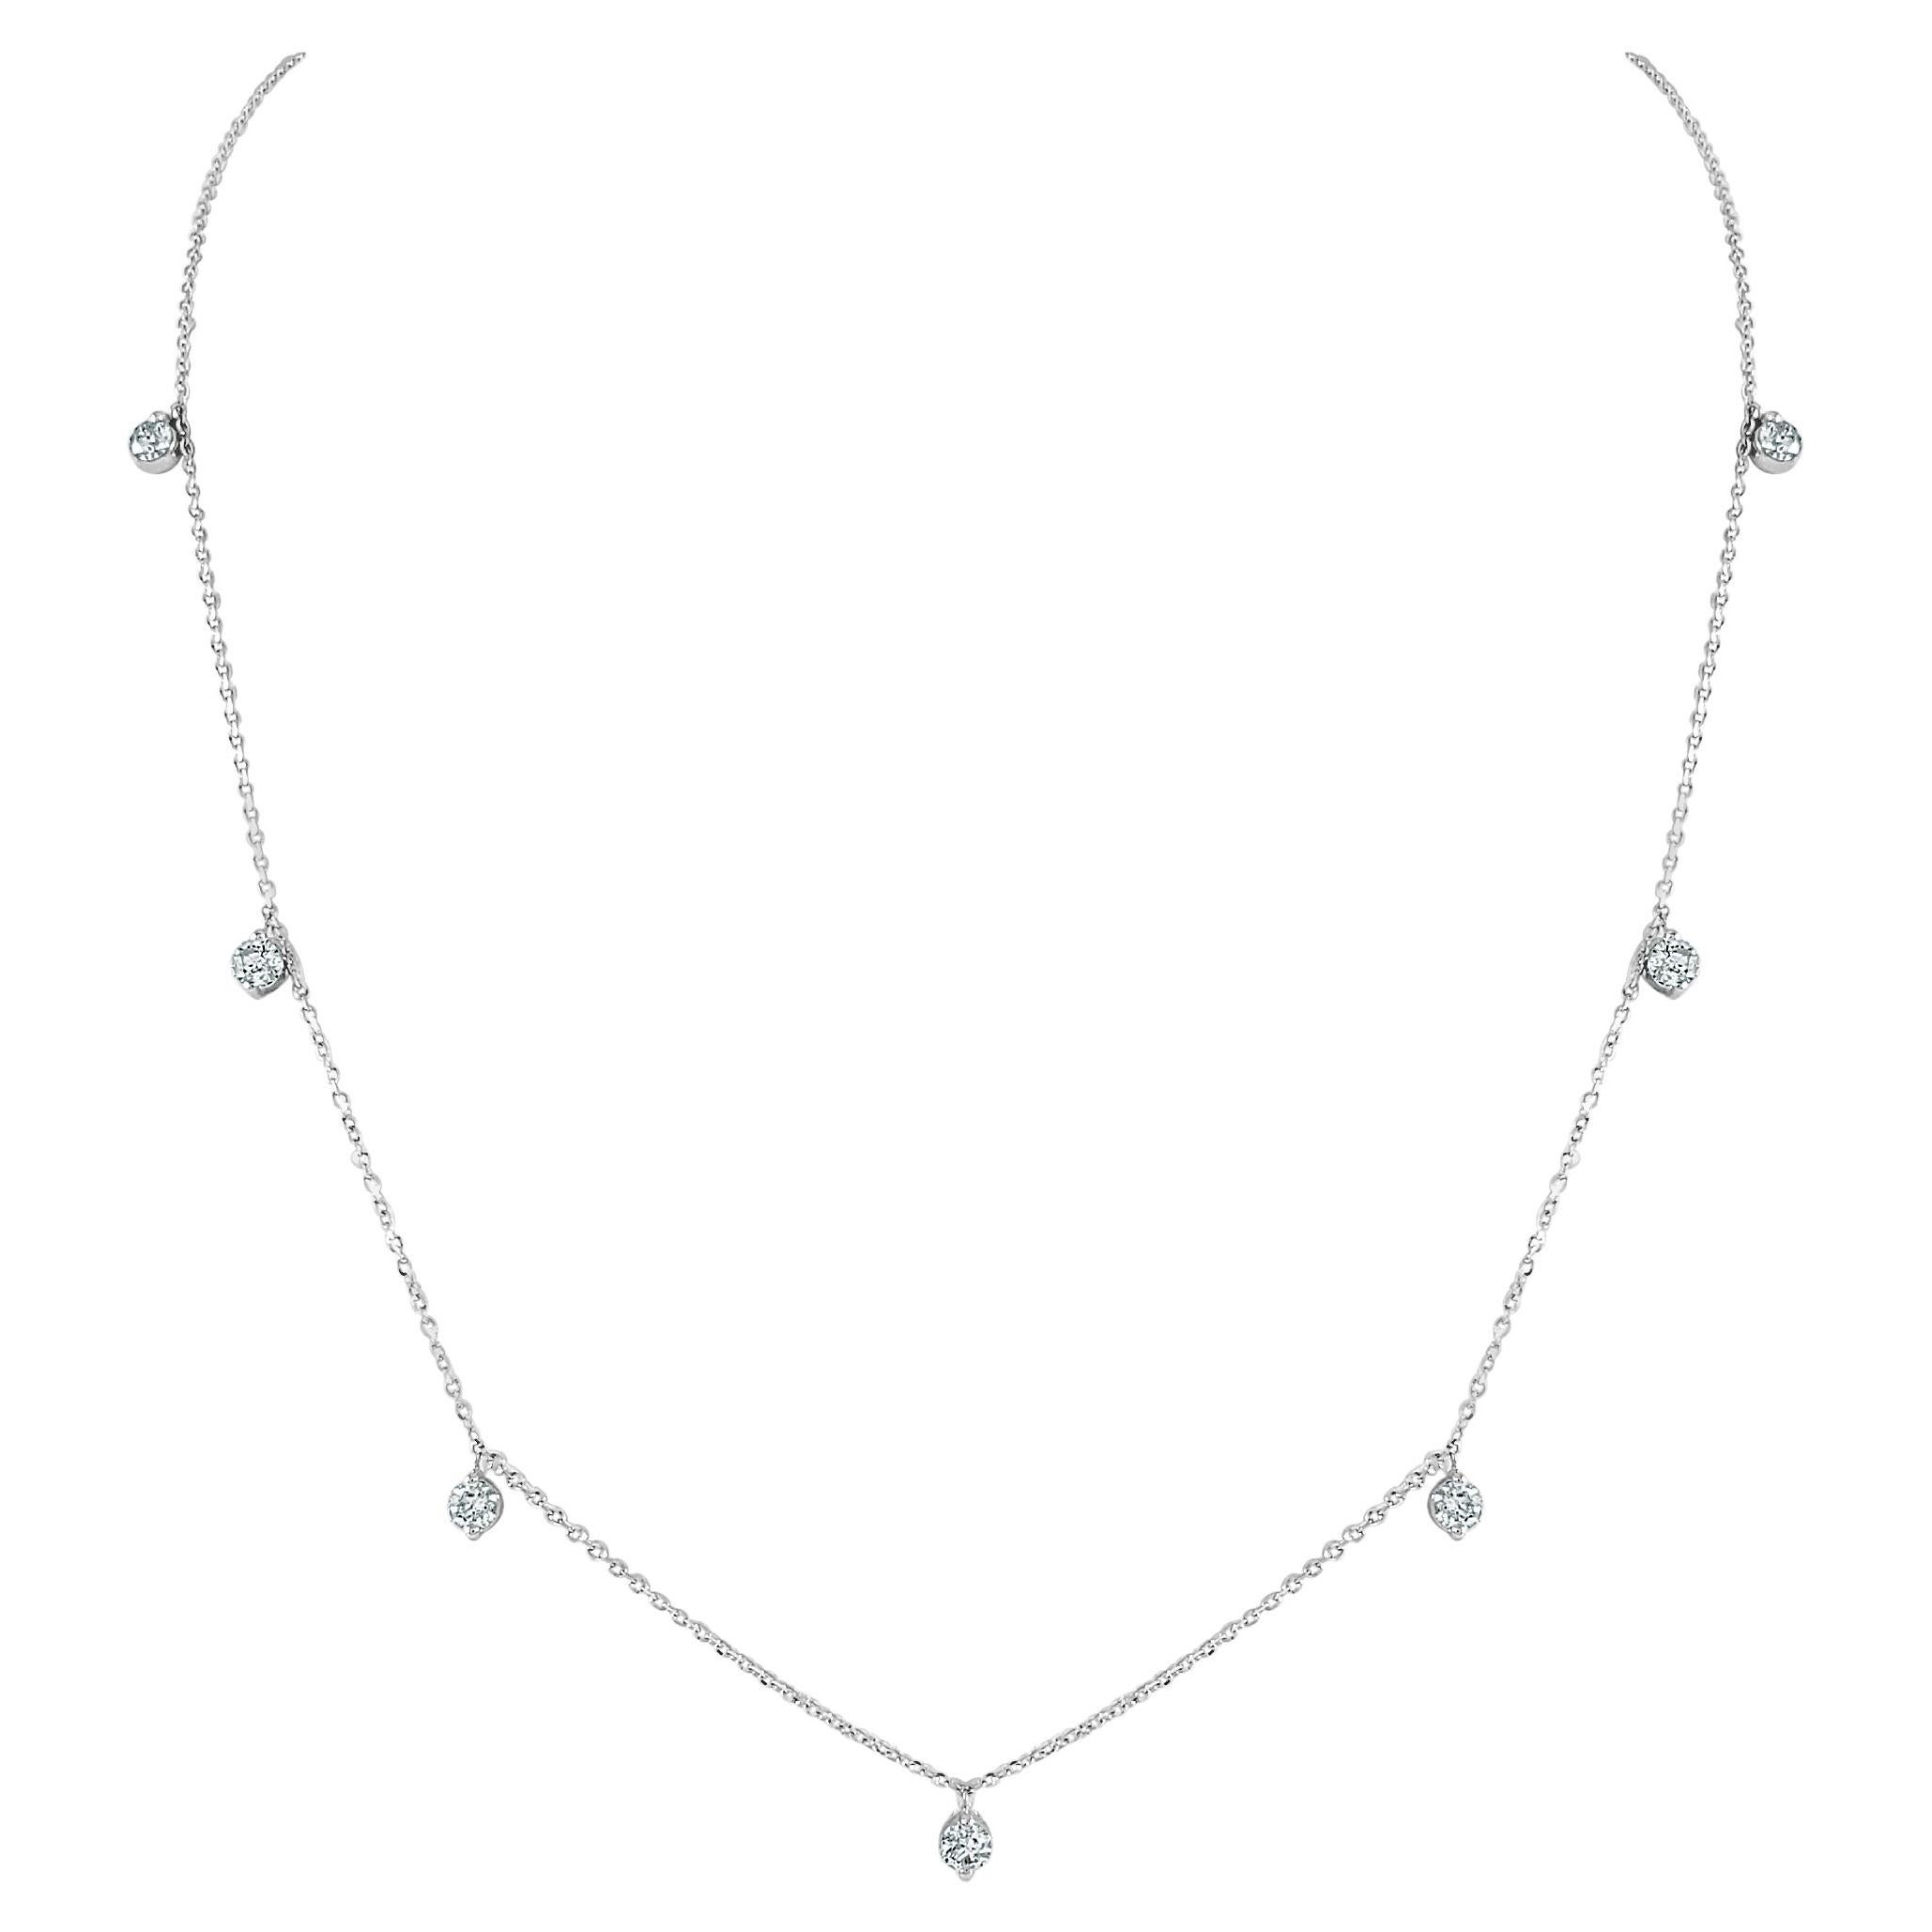 14K White Gold 0.79 Carat Diamond Station Dangle Necklace 16-18 inches